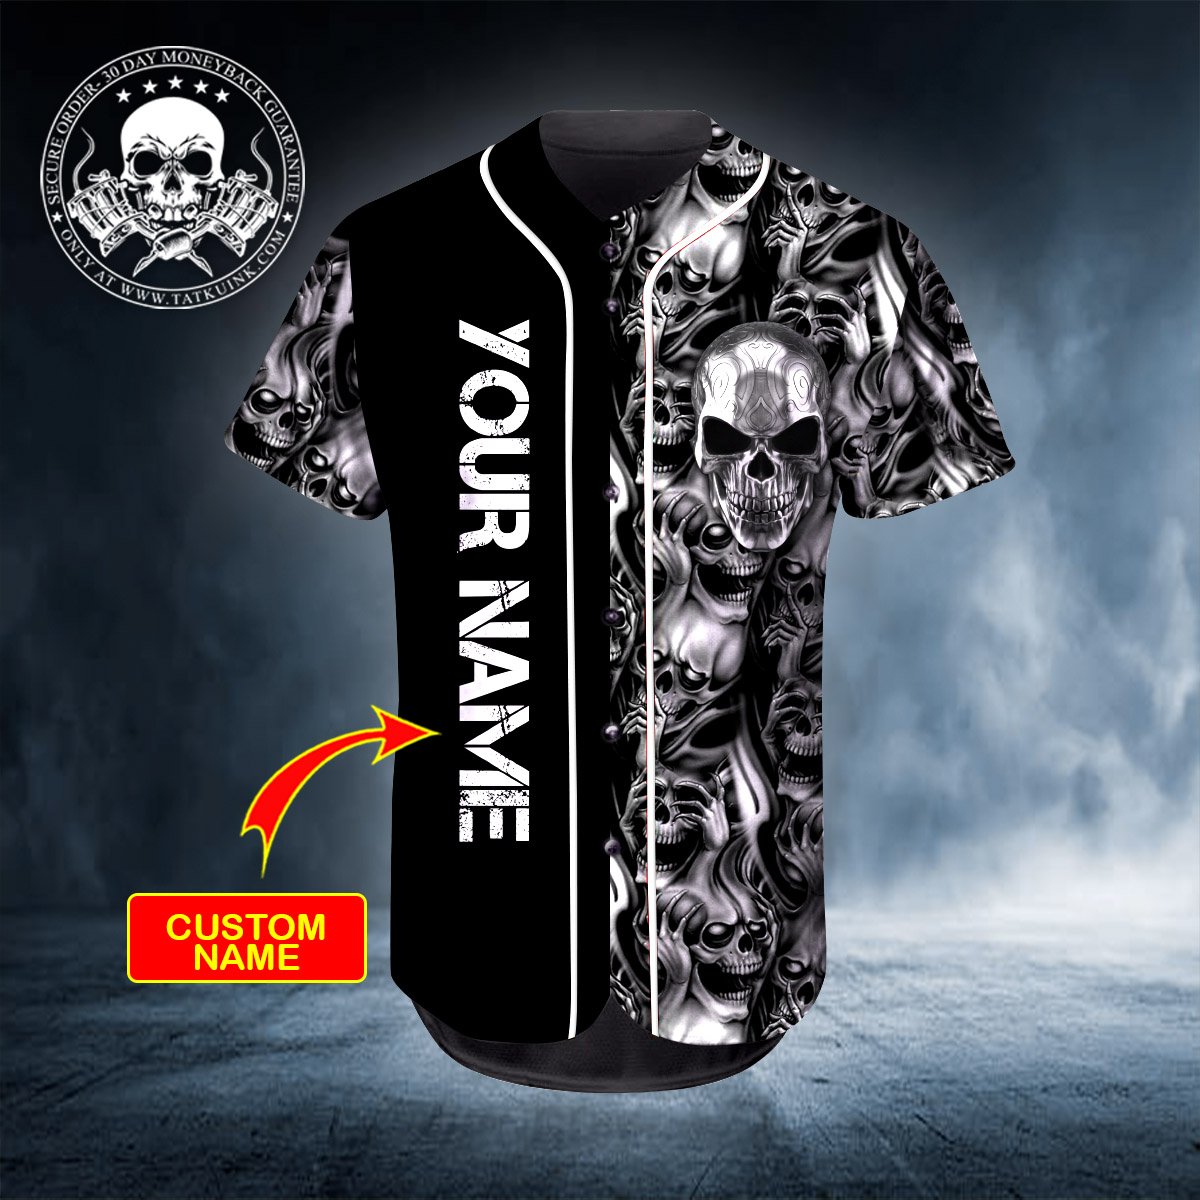 12-Ghost Silver Skull Personalized Baseball Jersey (4)